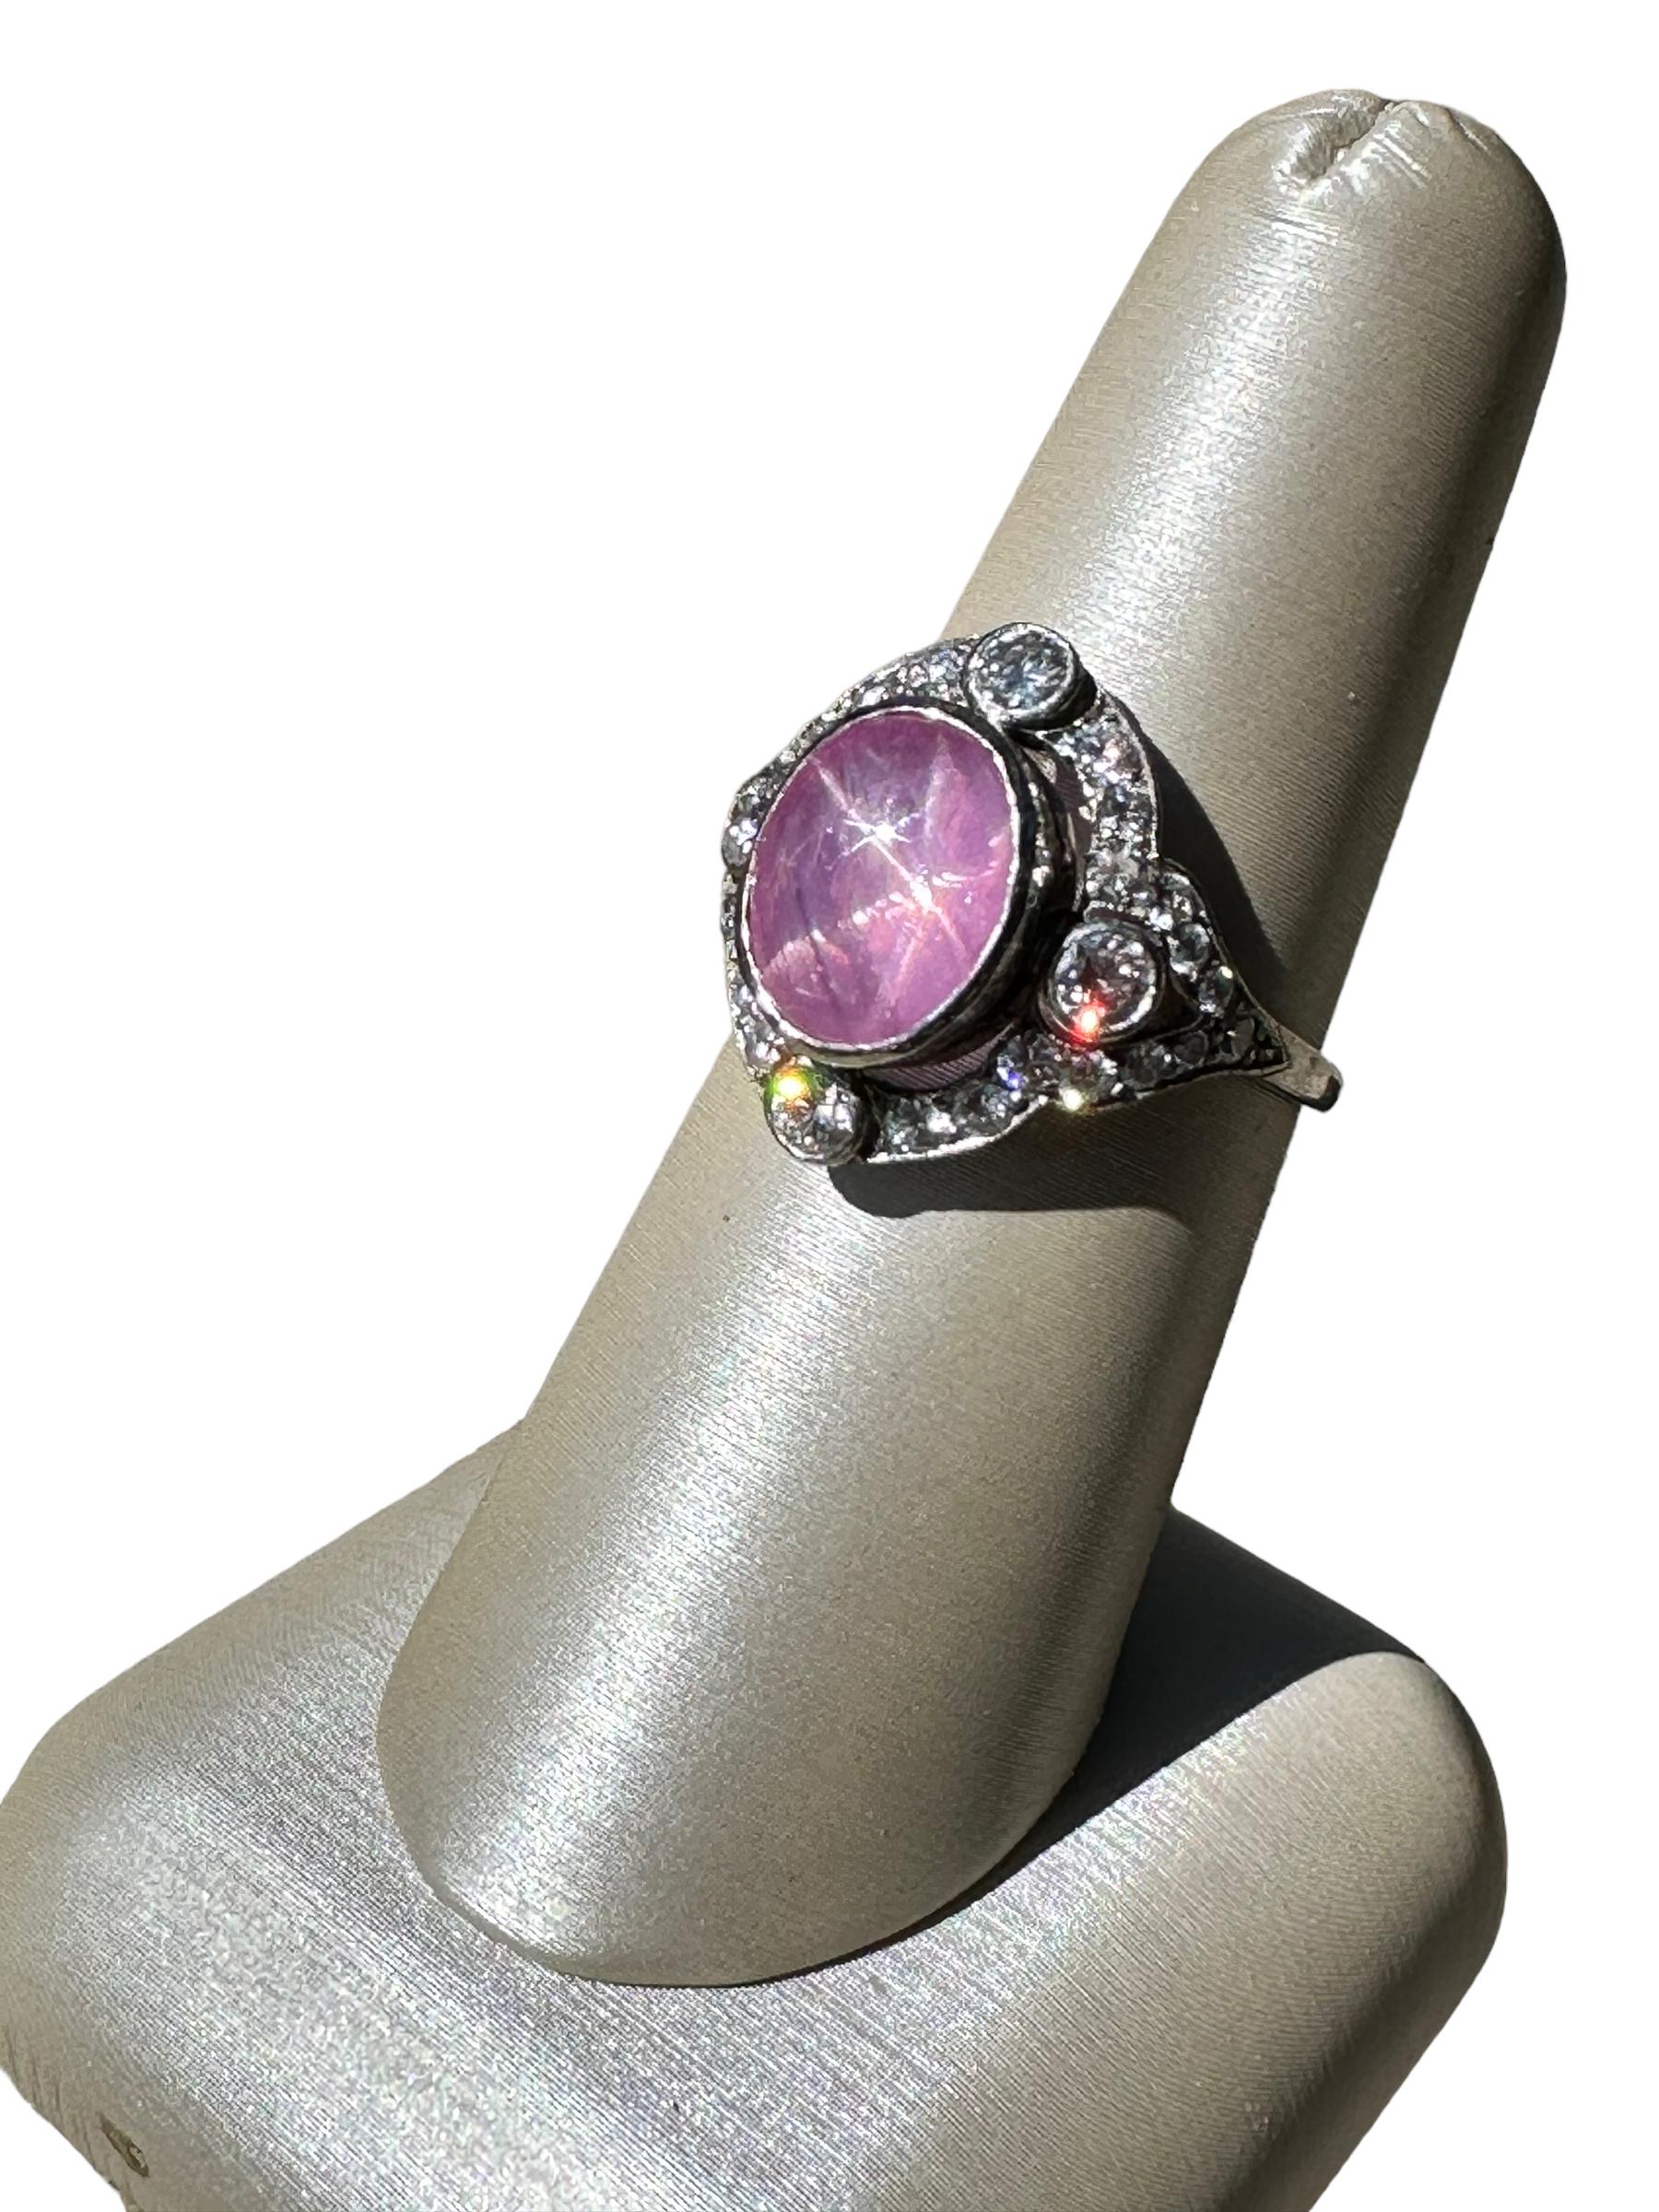 Stunning 1930's Art Deco Pink Star Sapphire and Diamond Dinner - or Cocktail - Ring (cocktails first, then dinner!).

The Art Deco platinum mounting is as perfect as it gets. The ring dates from the 1930's and is truly one to admire. The pink